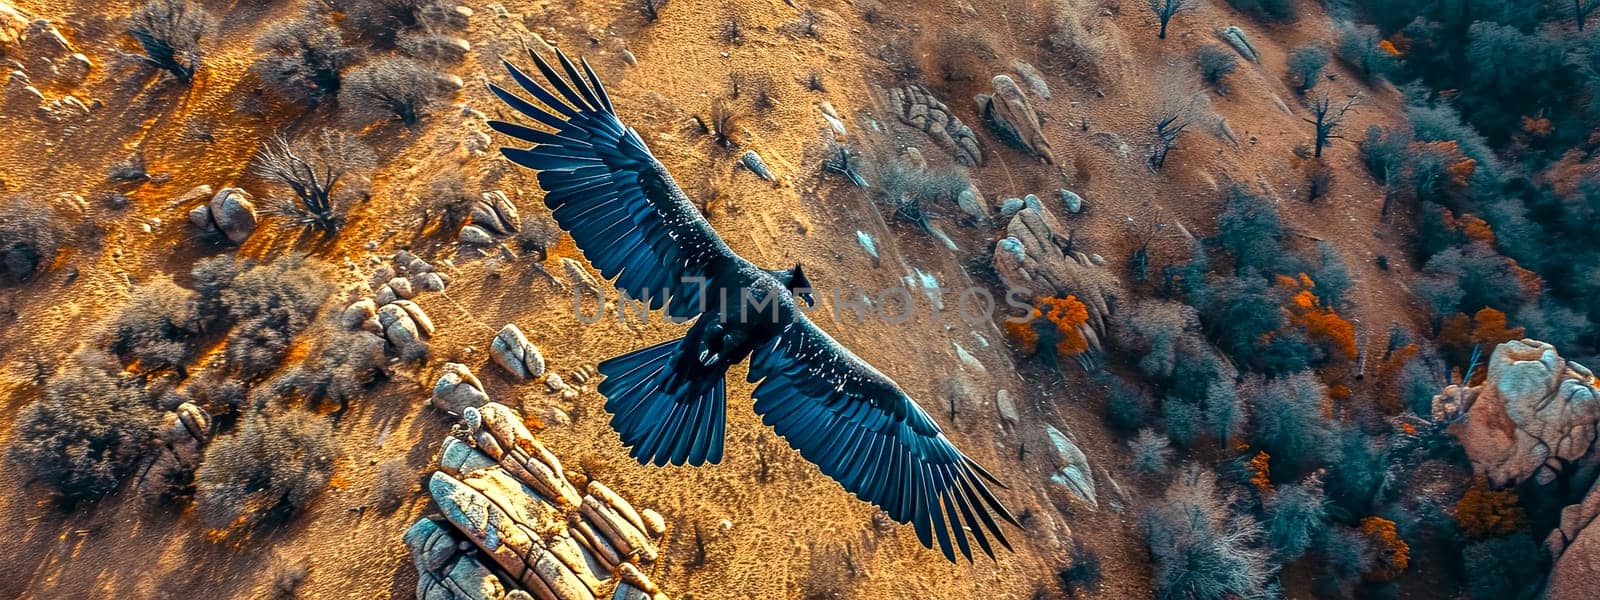 An imposing condor glides over a rugged landscape, captured from above in a breathtaking aerial shot that highlights the grace and majesty of this powerful bird in its natural habitat. by Edophoto